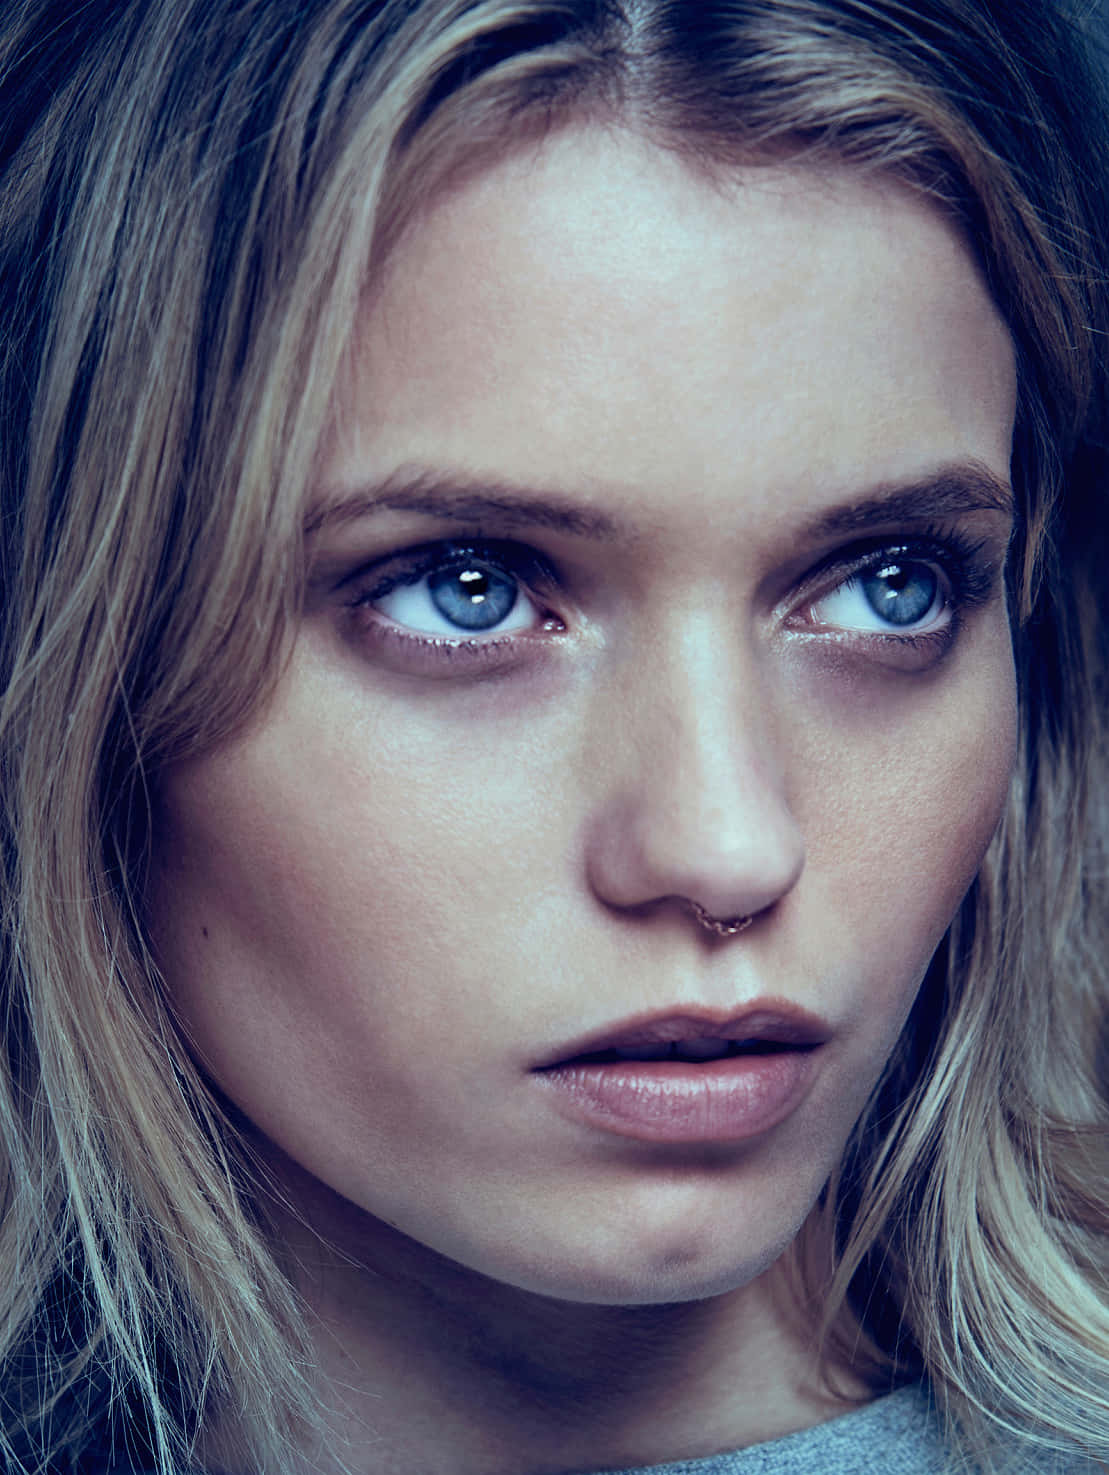 Stunning Abbey Lee Kershaw In Her Dynamic Style